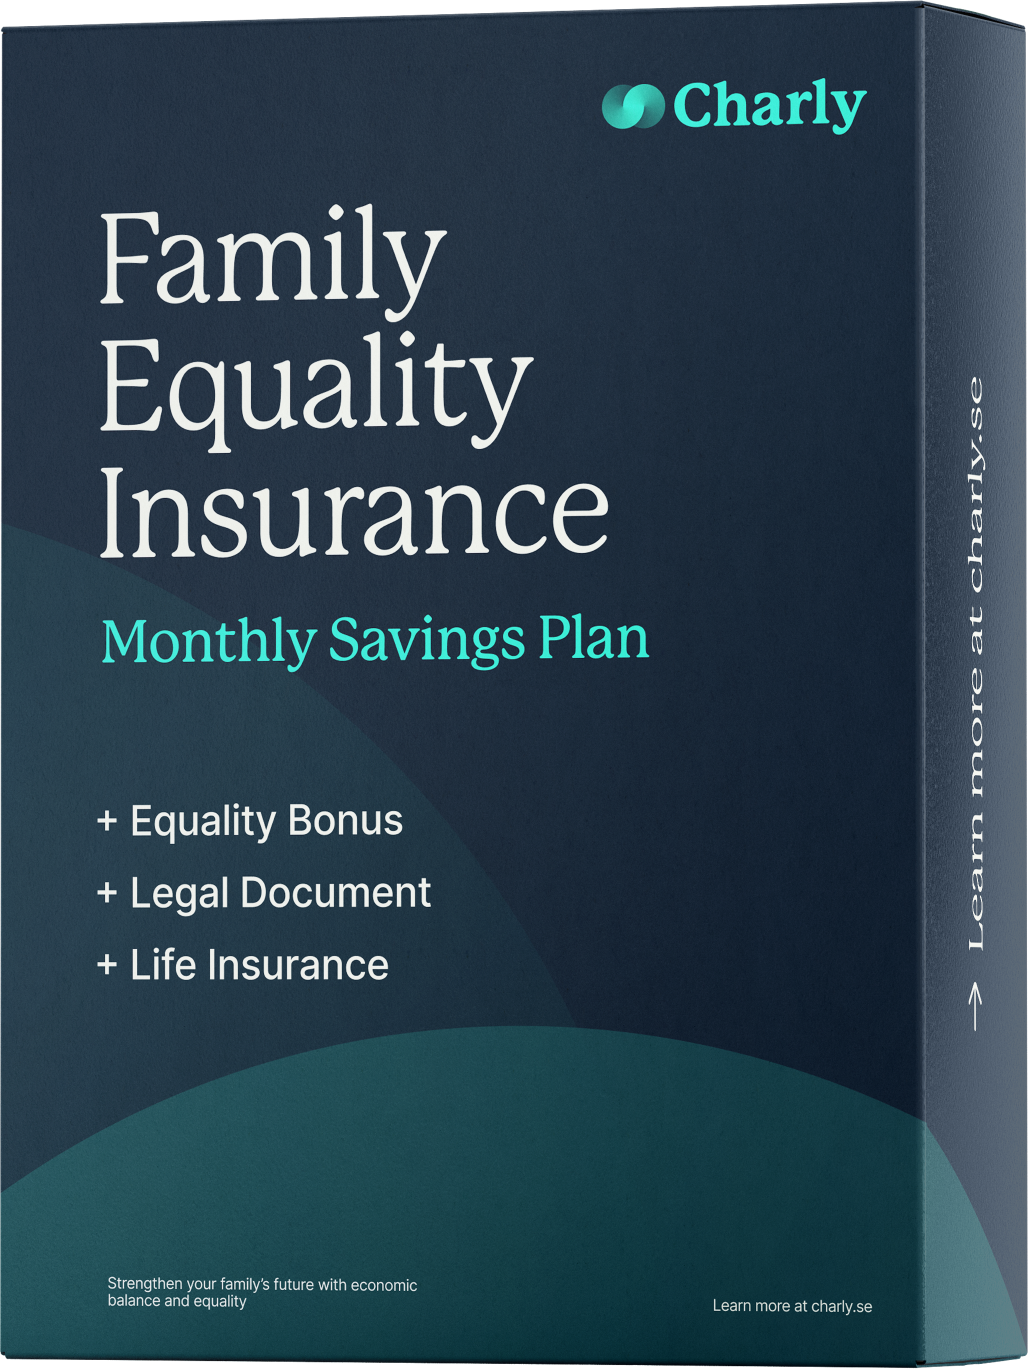 Family Equality Insurance package